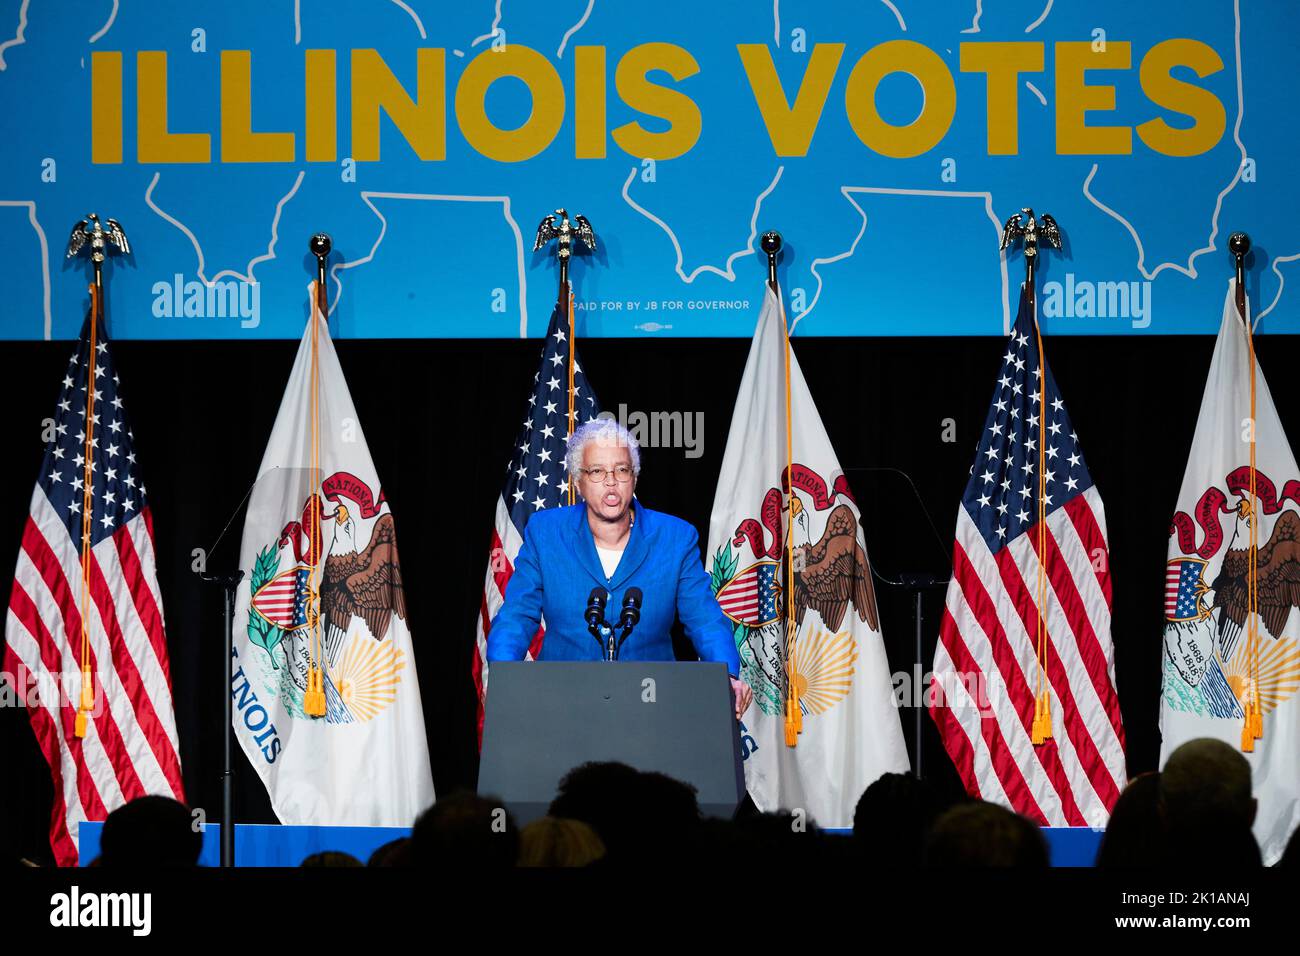 Chicago, Illinois. 16th Sep, 2022. Toni Preckwinkle, Cook County Commissioner, participates in a political event with Governor J.B. Pritzker (Democrat of Illinois) and United States Vice President Kamala Harris at the University of Illinois, in Chicago, Illinois, on September 16, 2022. Credit: Mustafa Hussain/Pool via CNP/dpa/Alamy Live News Stock Photo